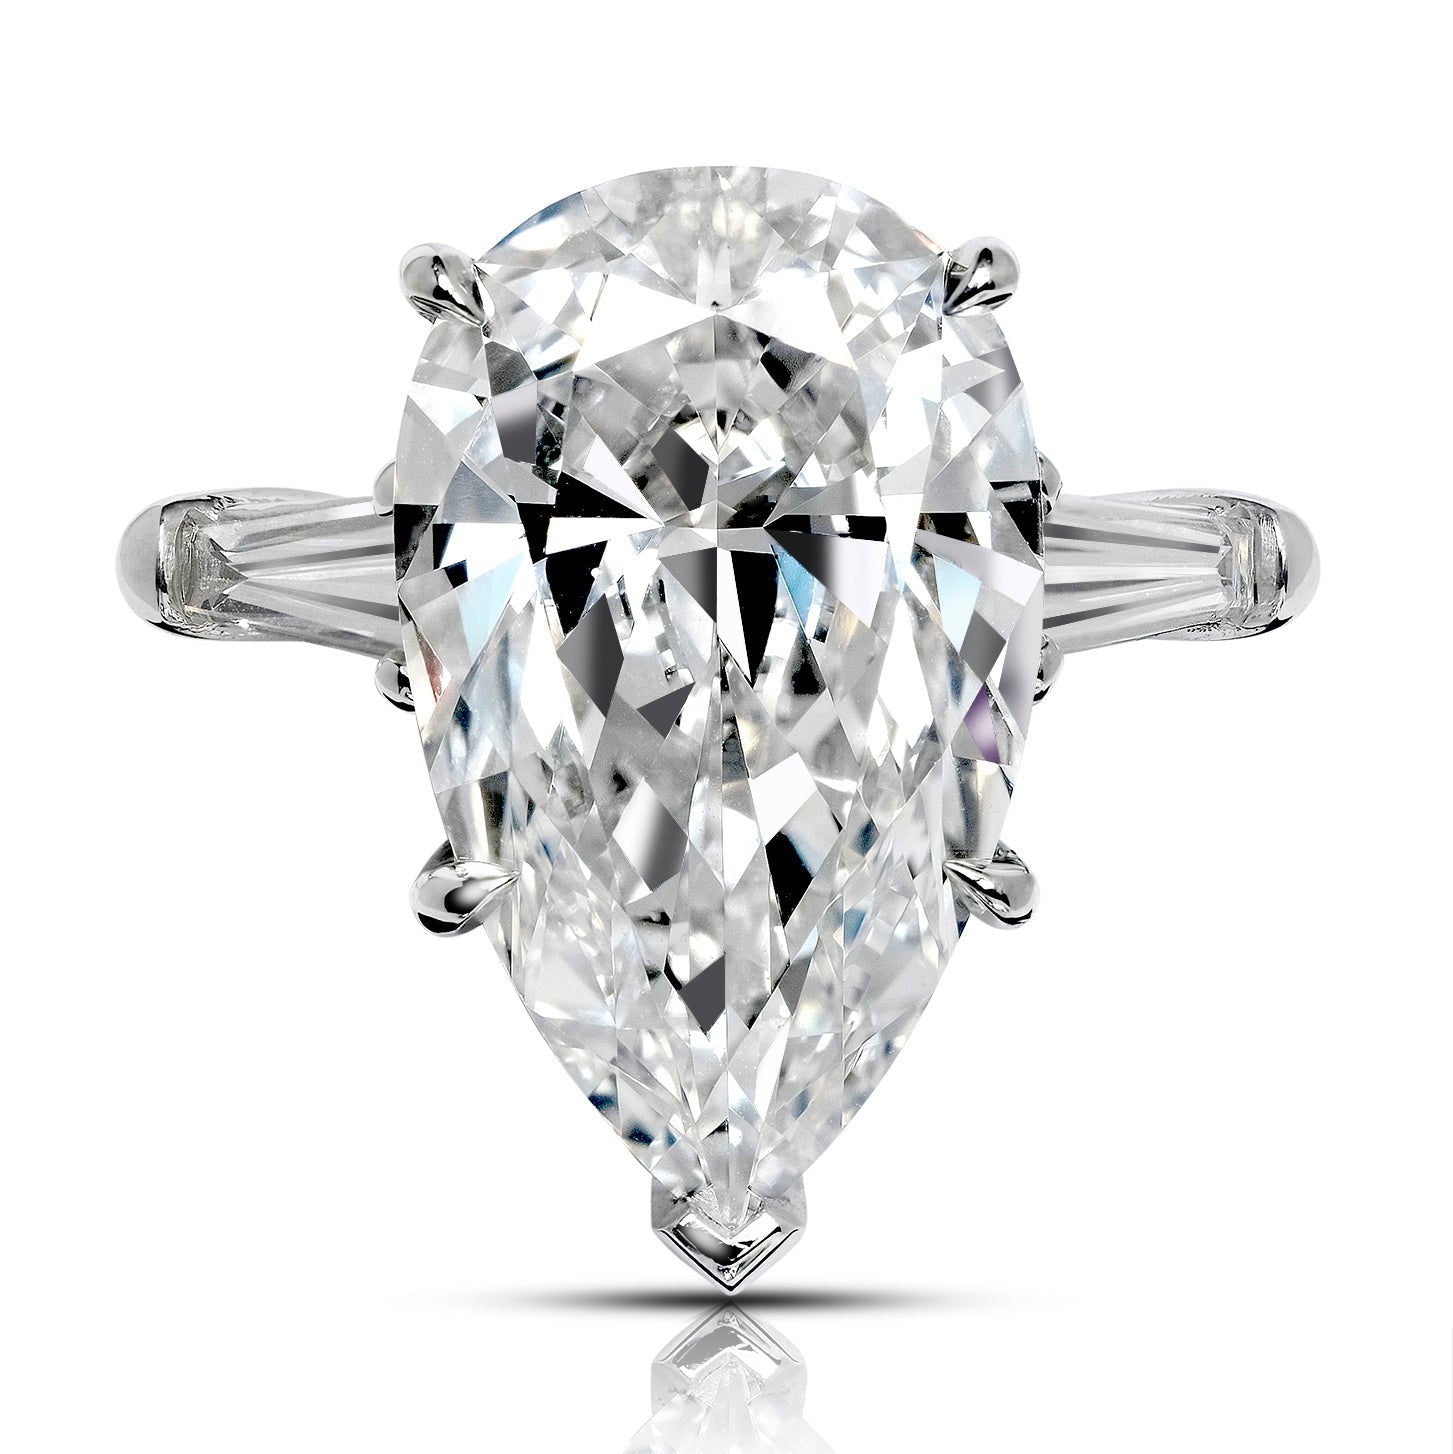 Majestic Pear cut Diamond Essence ring. 3 carat Pear center encircled by  baguettes accents on either side. 5.0 cts.t.w. in 14K Solid White Gold.